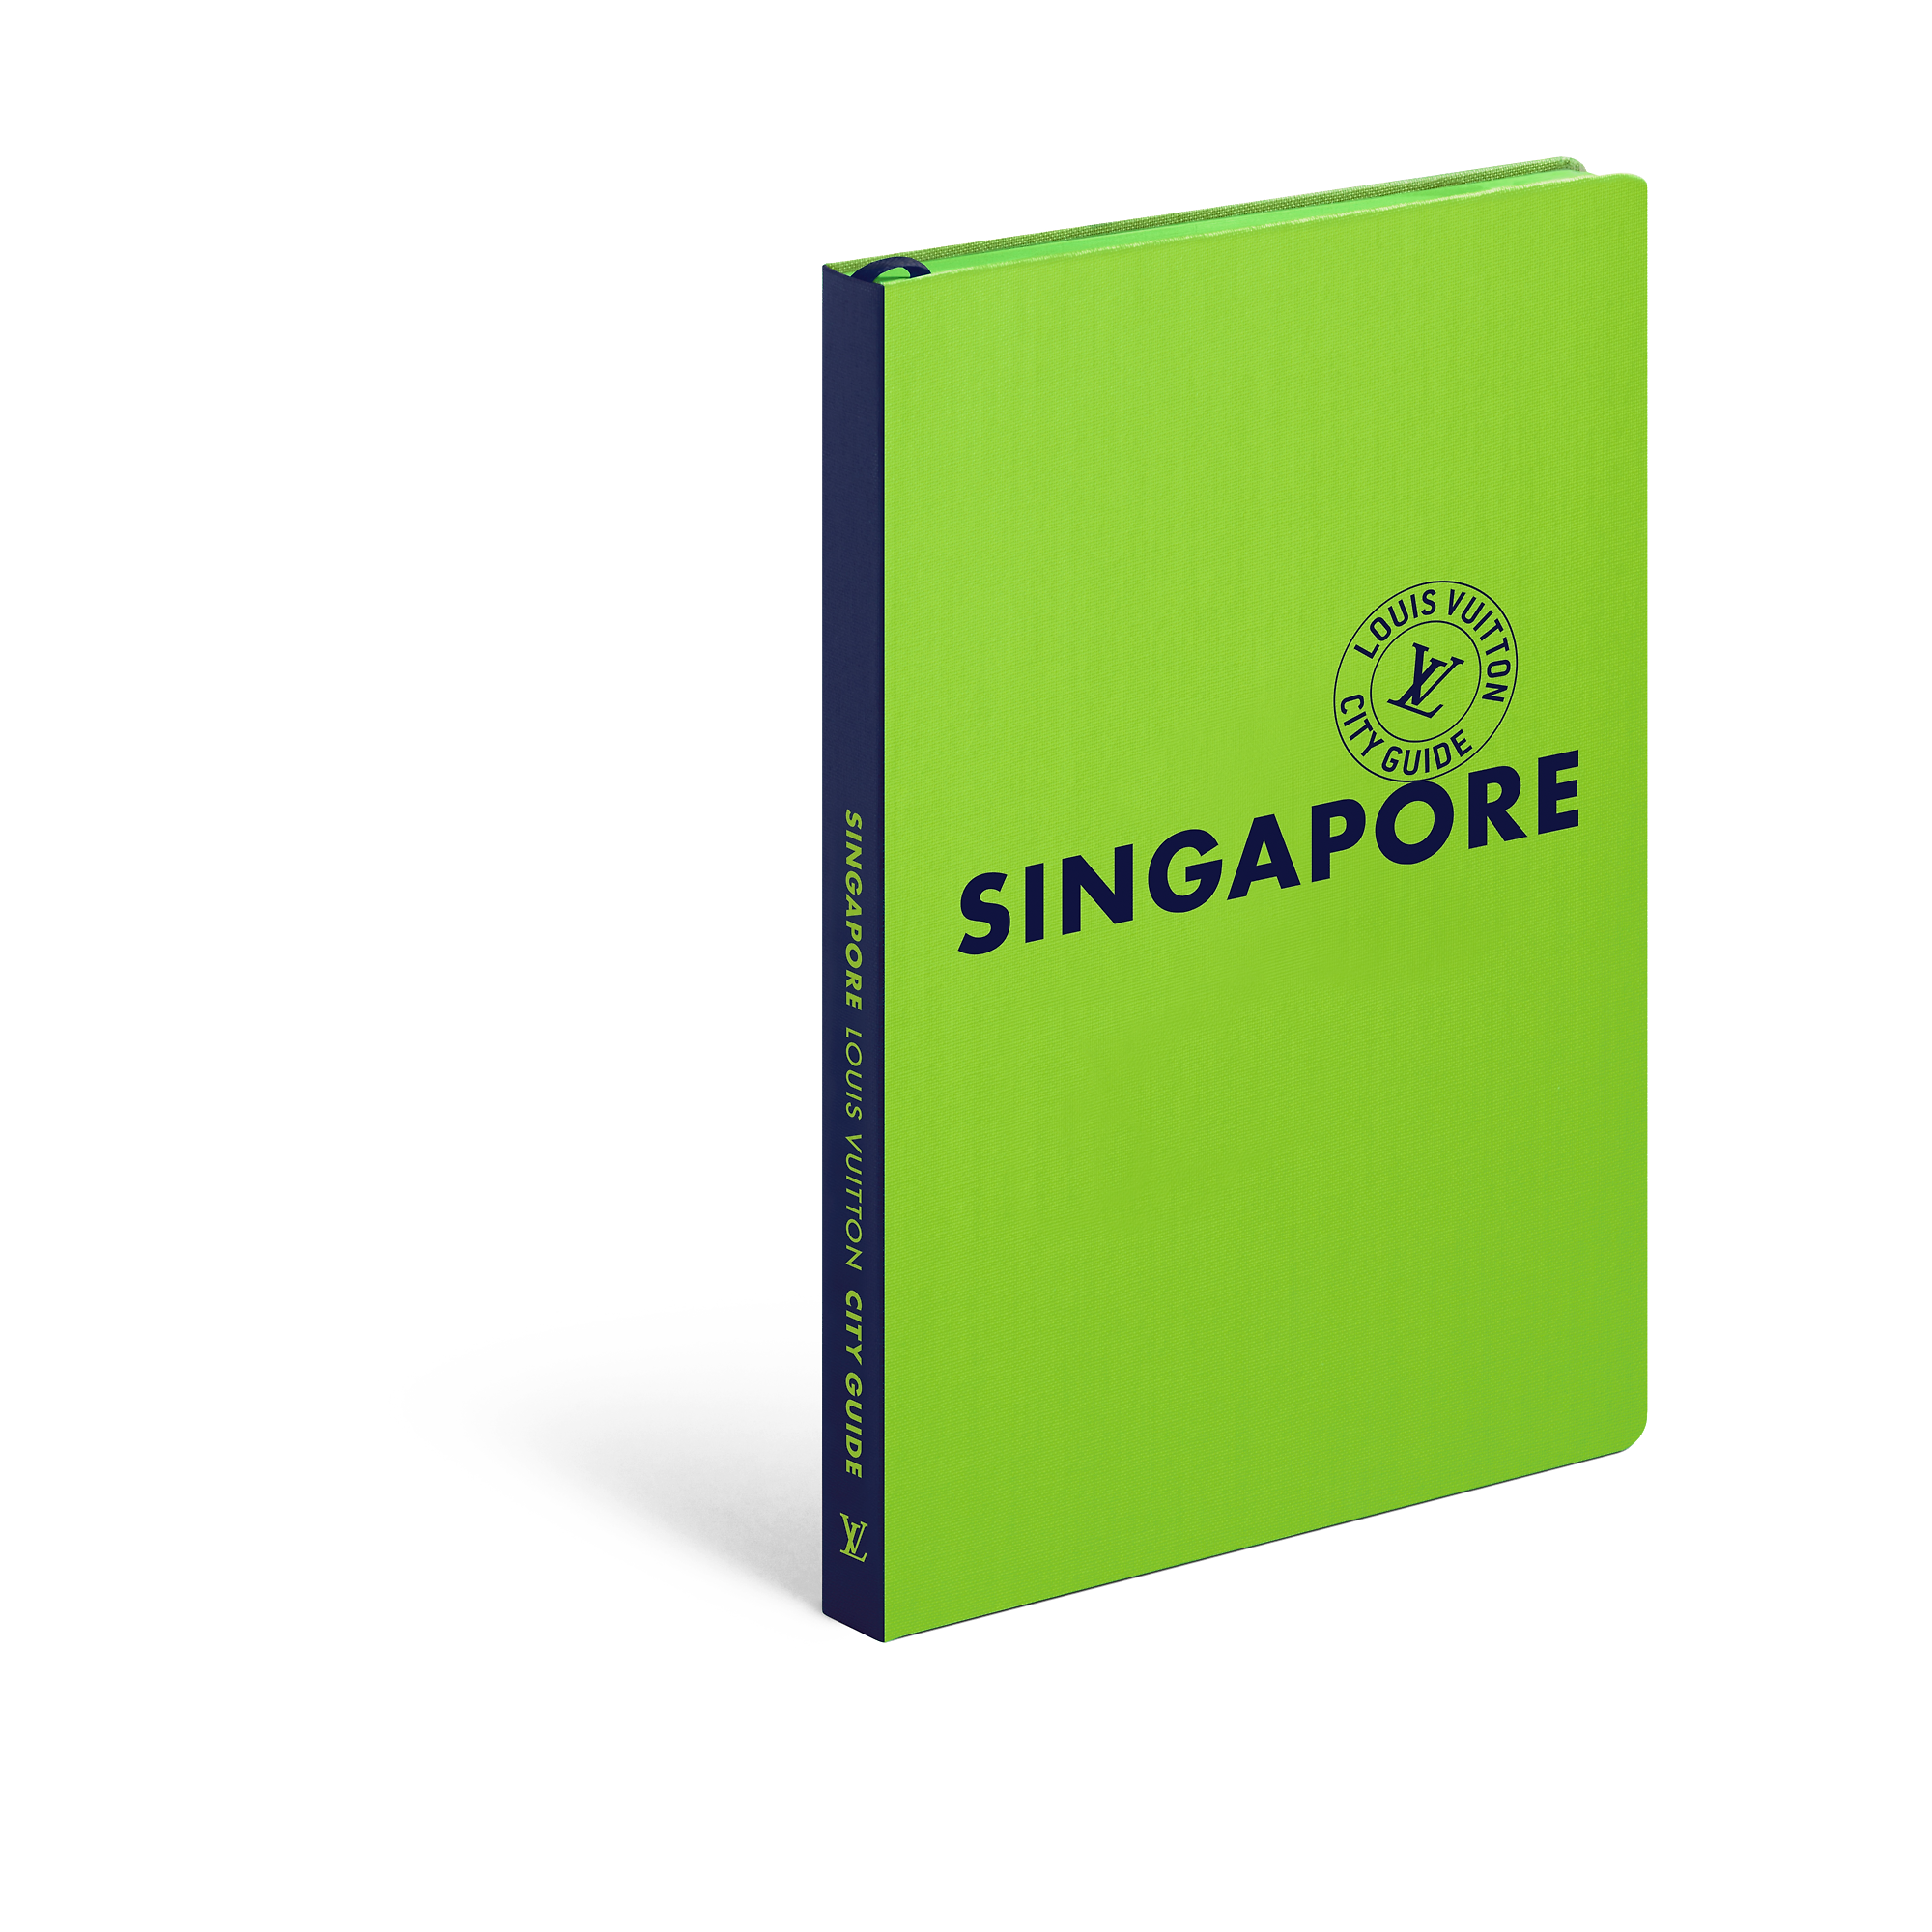 Louis Vuitton City Guide Singapor, English Version – Art of Living – Books and Stationery R08991